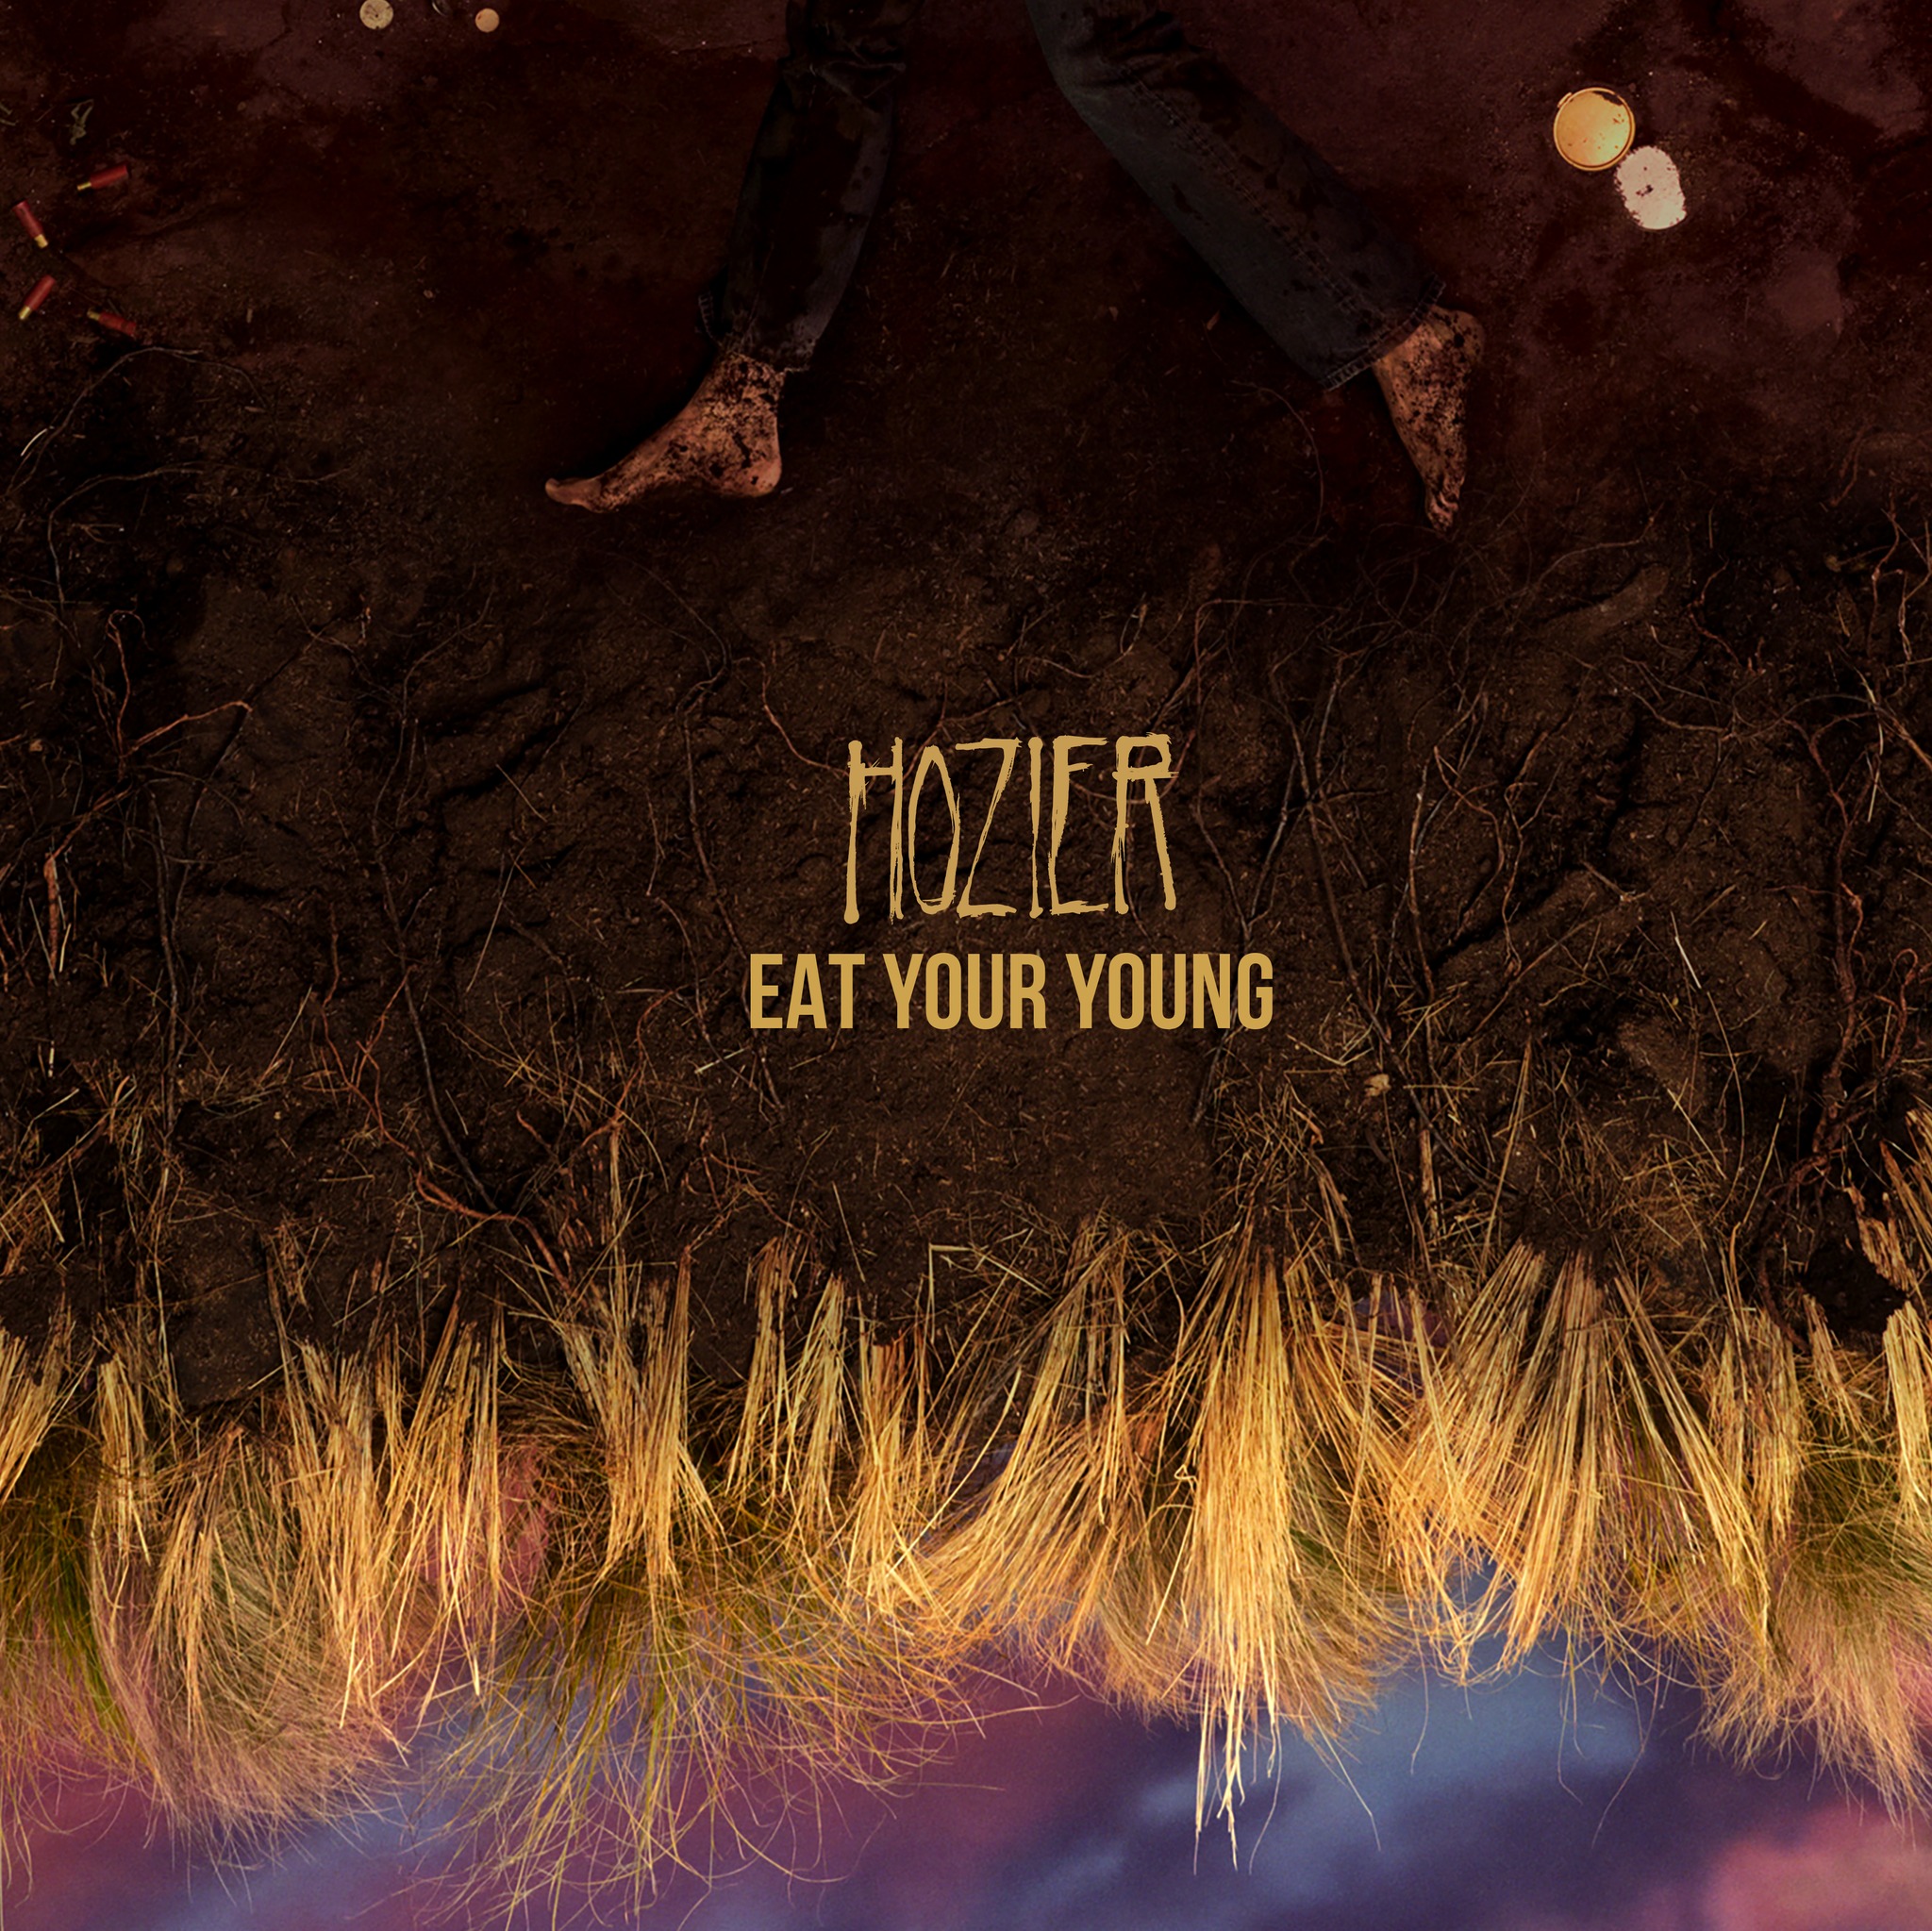 TRACK x TRACK: Eat Your Young by Hozier